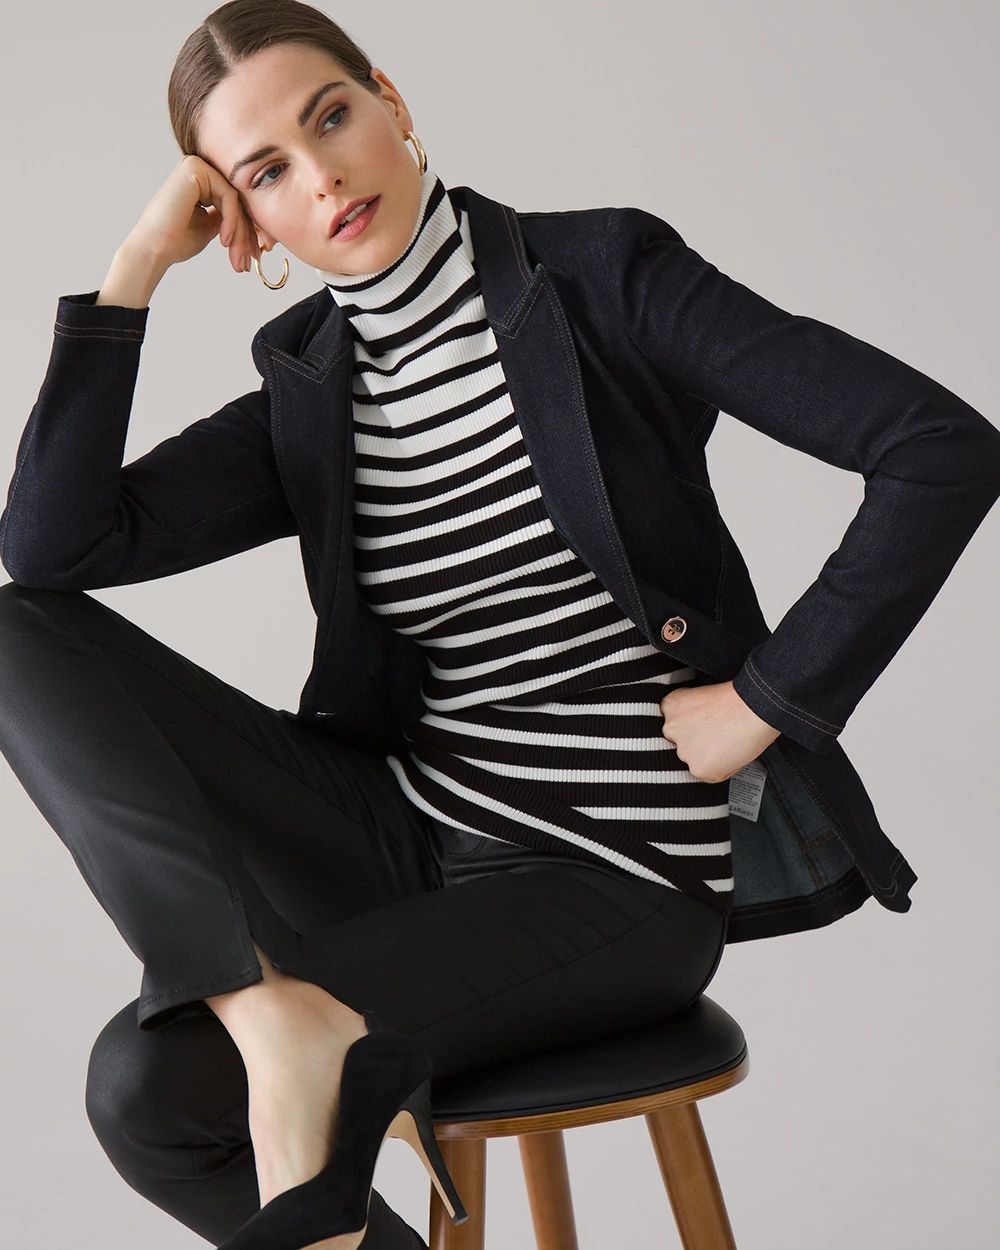 Petite Long-Sleeve Ribbed Striped Turtleneck click to view larger image.